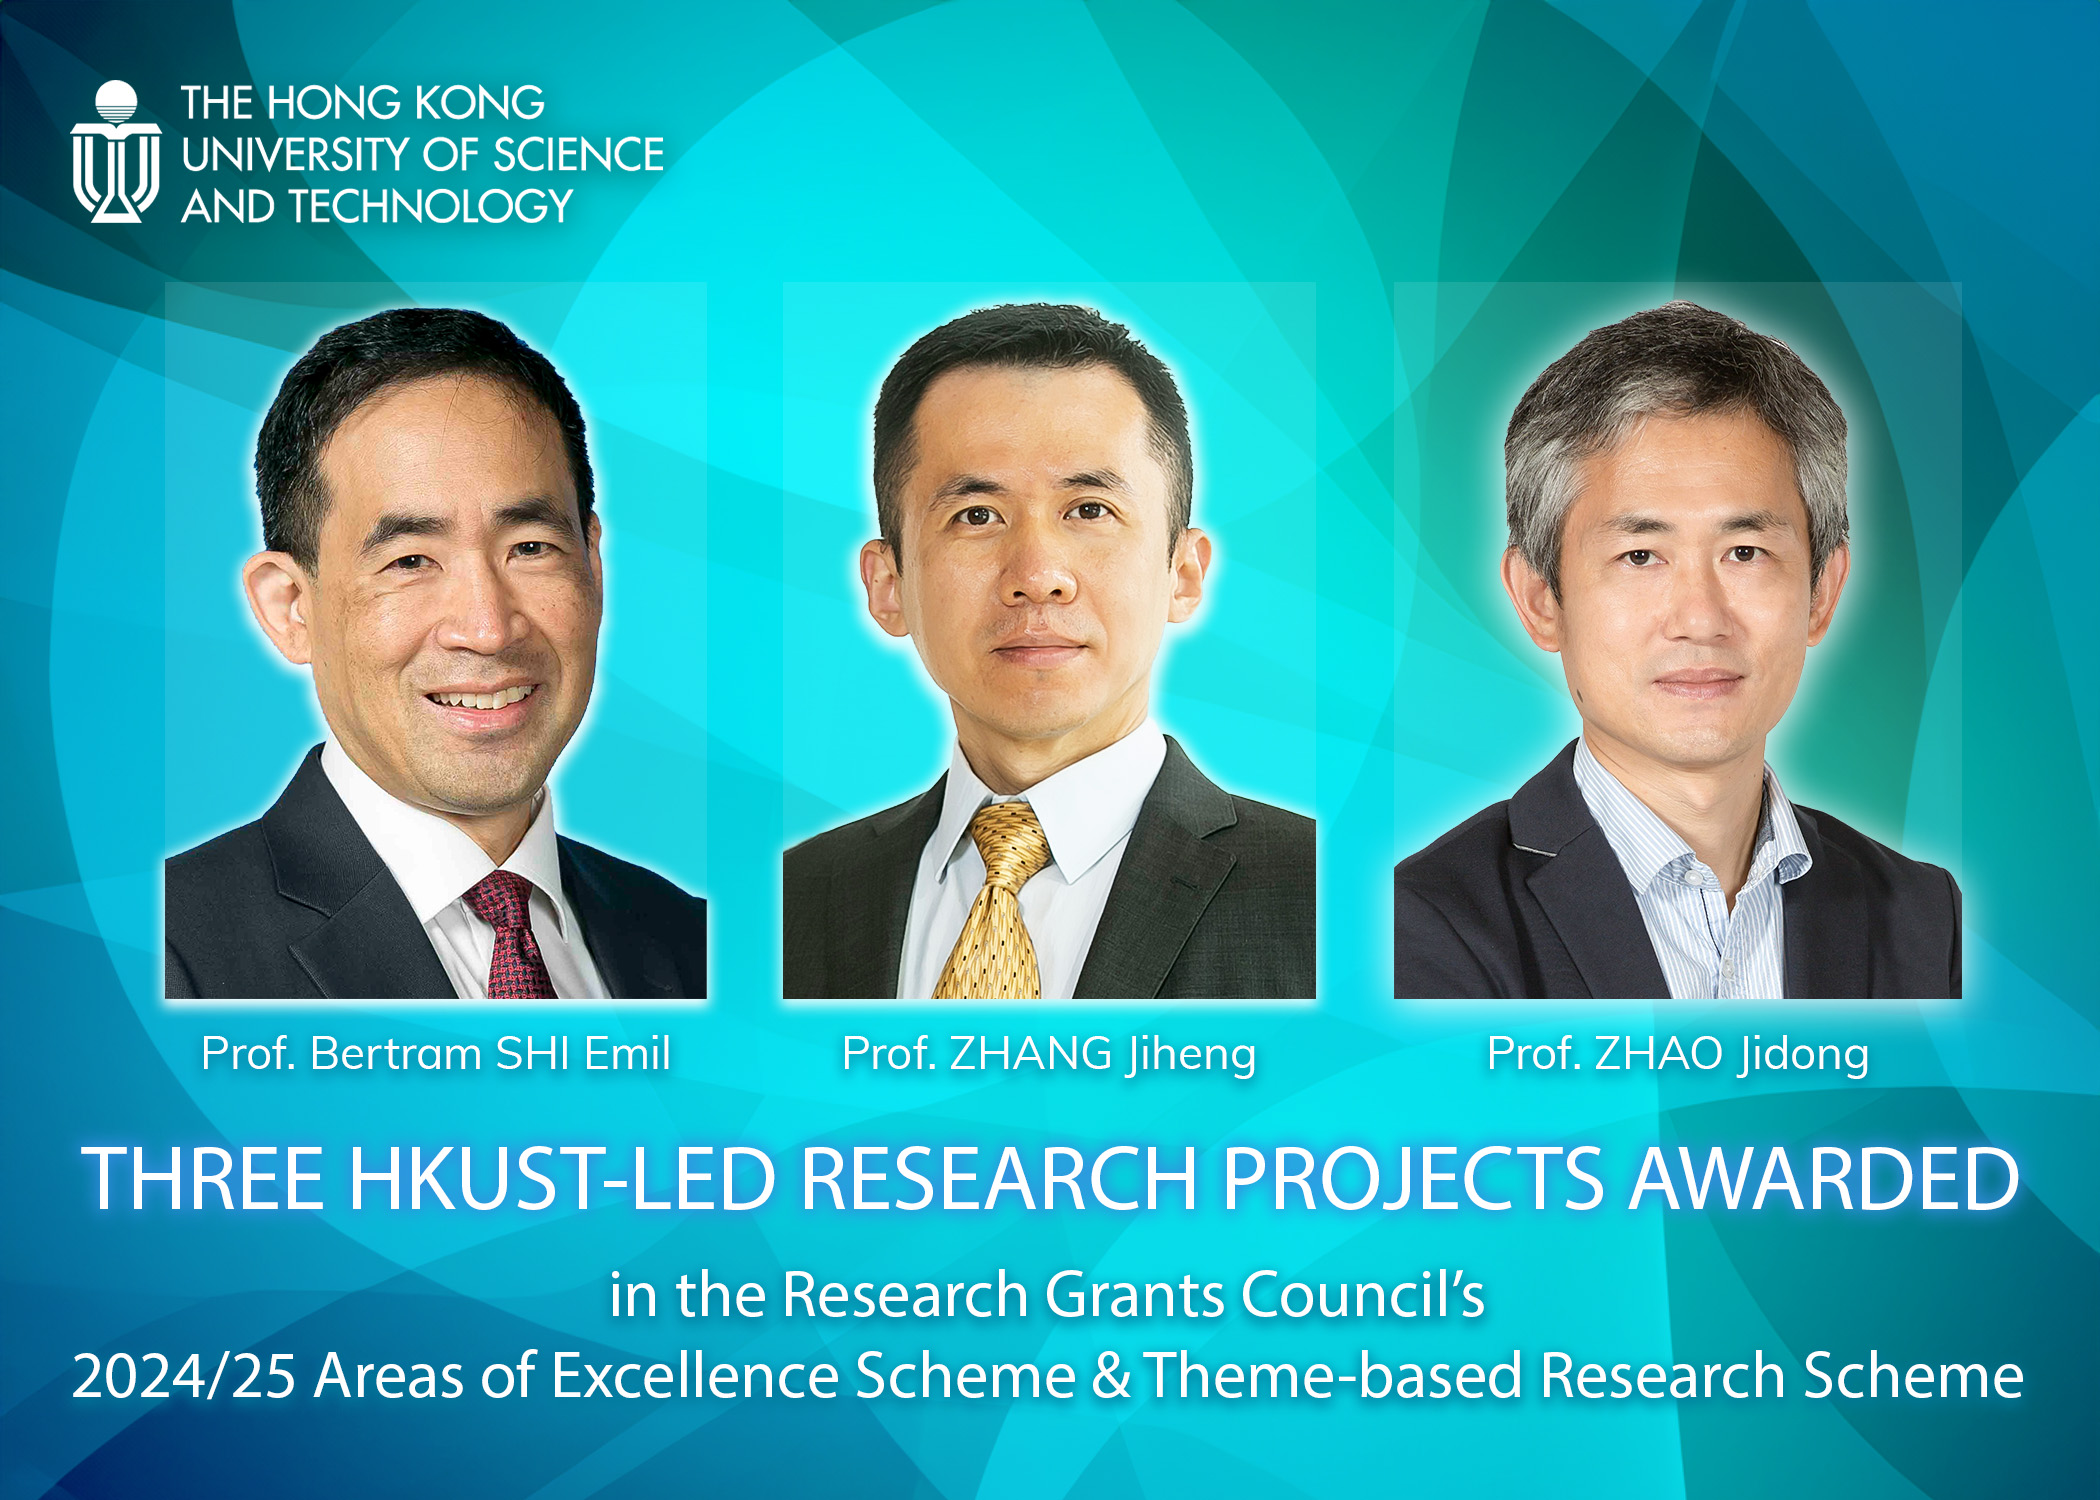 The three HKUST research projects led by Prof. Bertram SHI Emil, Professor of the Department of Electronic and Computer Engineering (left); Prof. ZHANG Jiheng, Head and Professor of the Department of Industrial Engineering and Decision Analytics (middle); and Prof. ZHAO Jidong, Professor of the Department of Civil and Environmental Engineering (right), were awarded a total funding of HK$212.5 million by the RGC’s AoE Scheme and the TRS Scheme 2024/25.